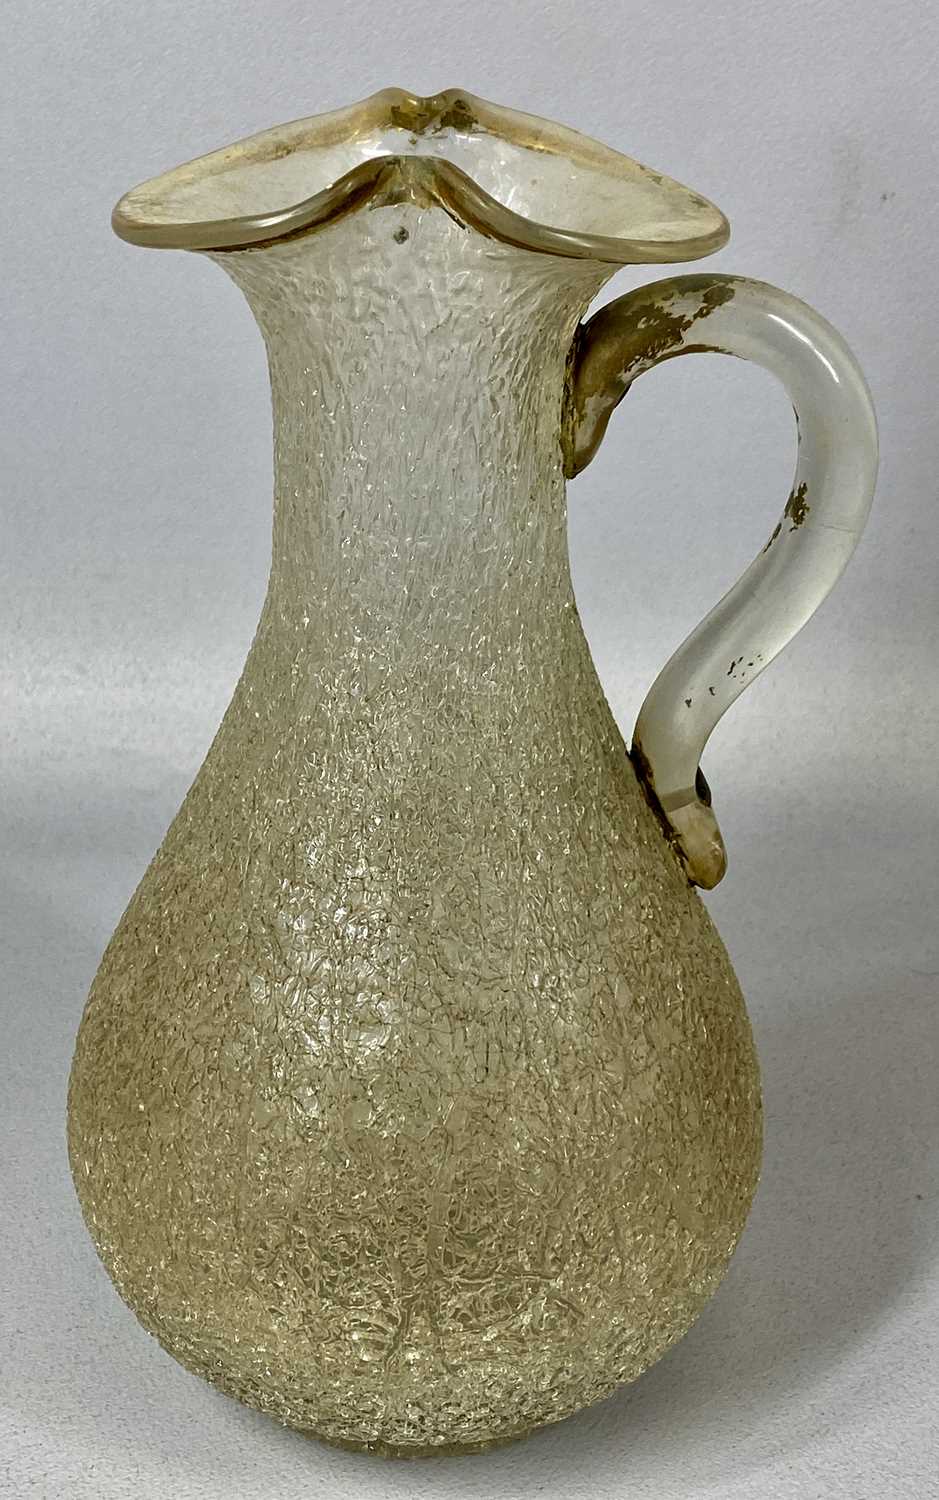 HARRACH TYPE CRACKLE GLASSWARE, three pieces - pitcher, 26cms (h), goblet, 19.5cms (h) and - Image 4 of 4